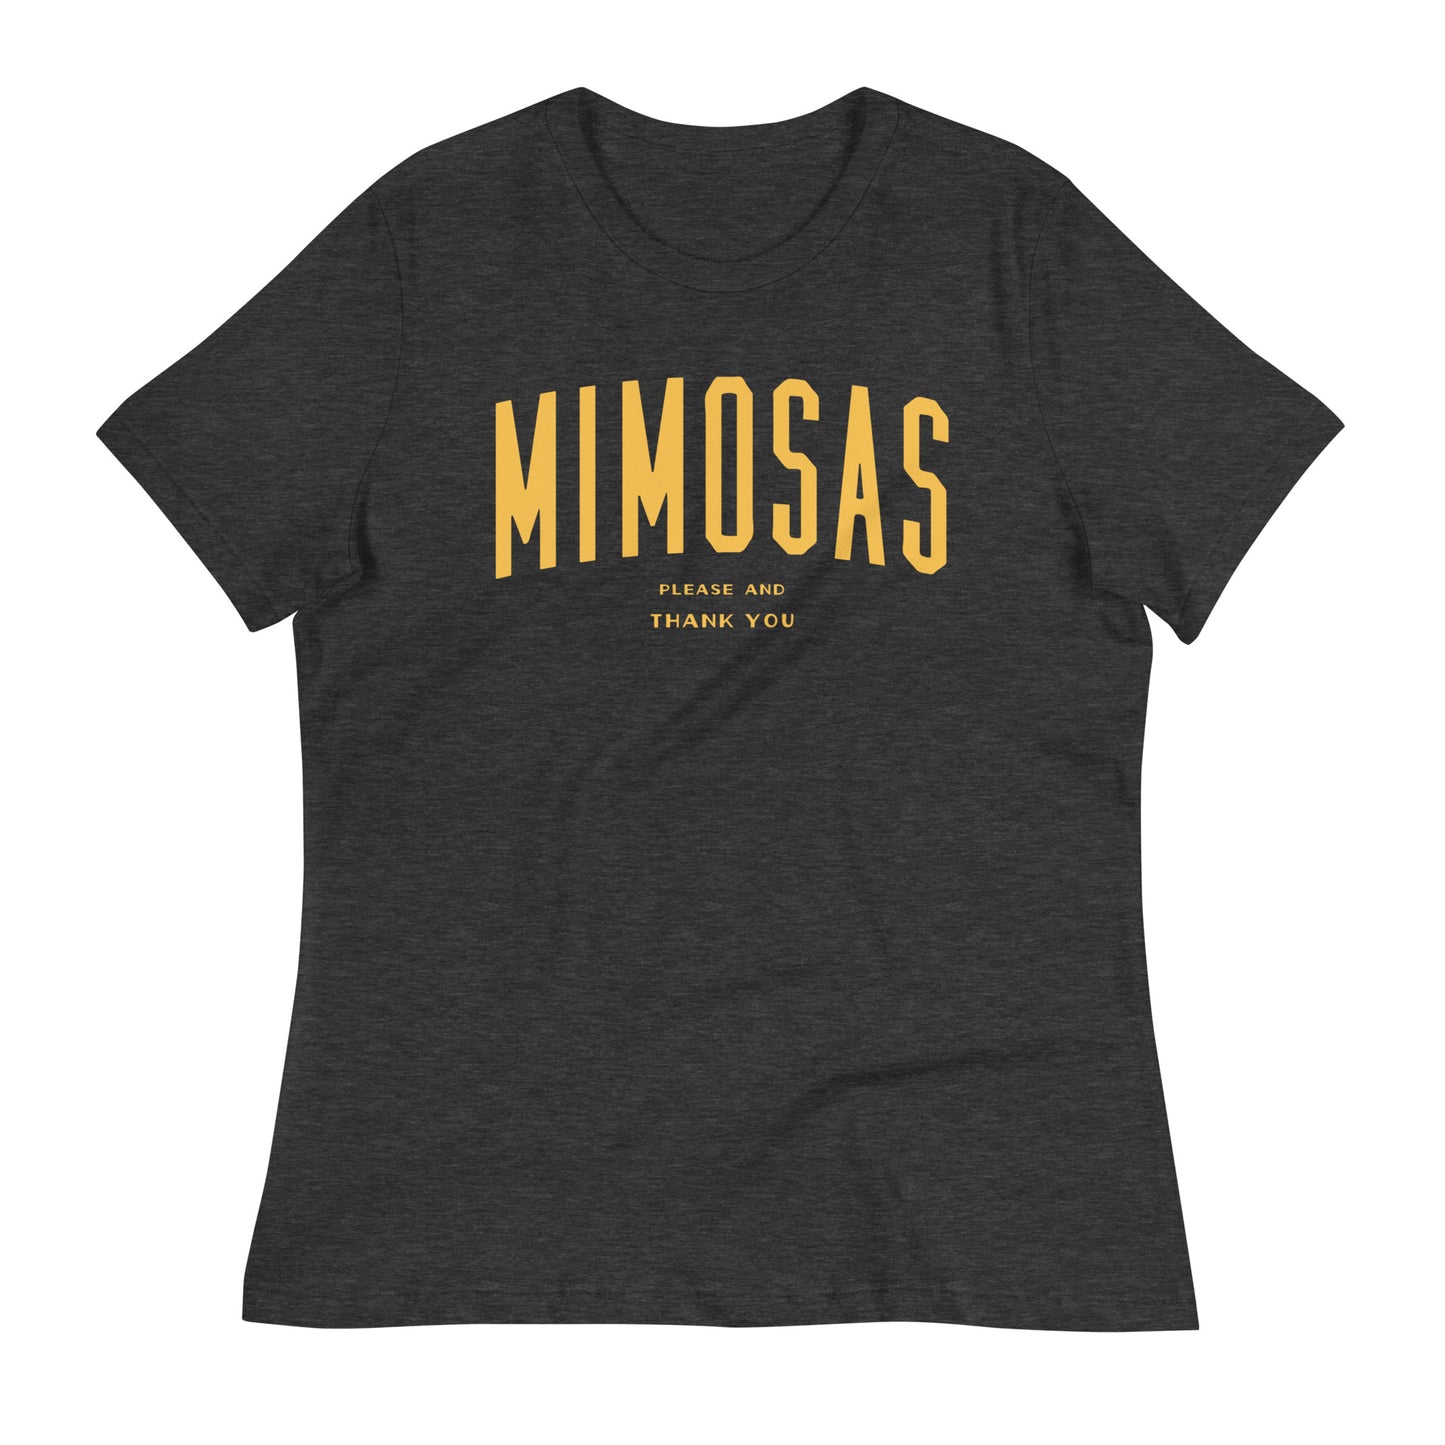 Mimosas Please And Thank You Women's Signature Tee